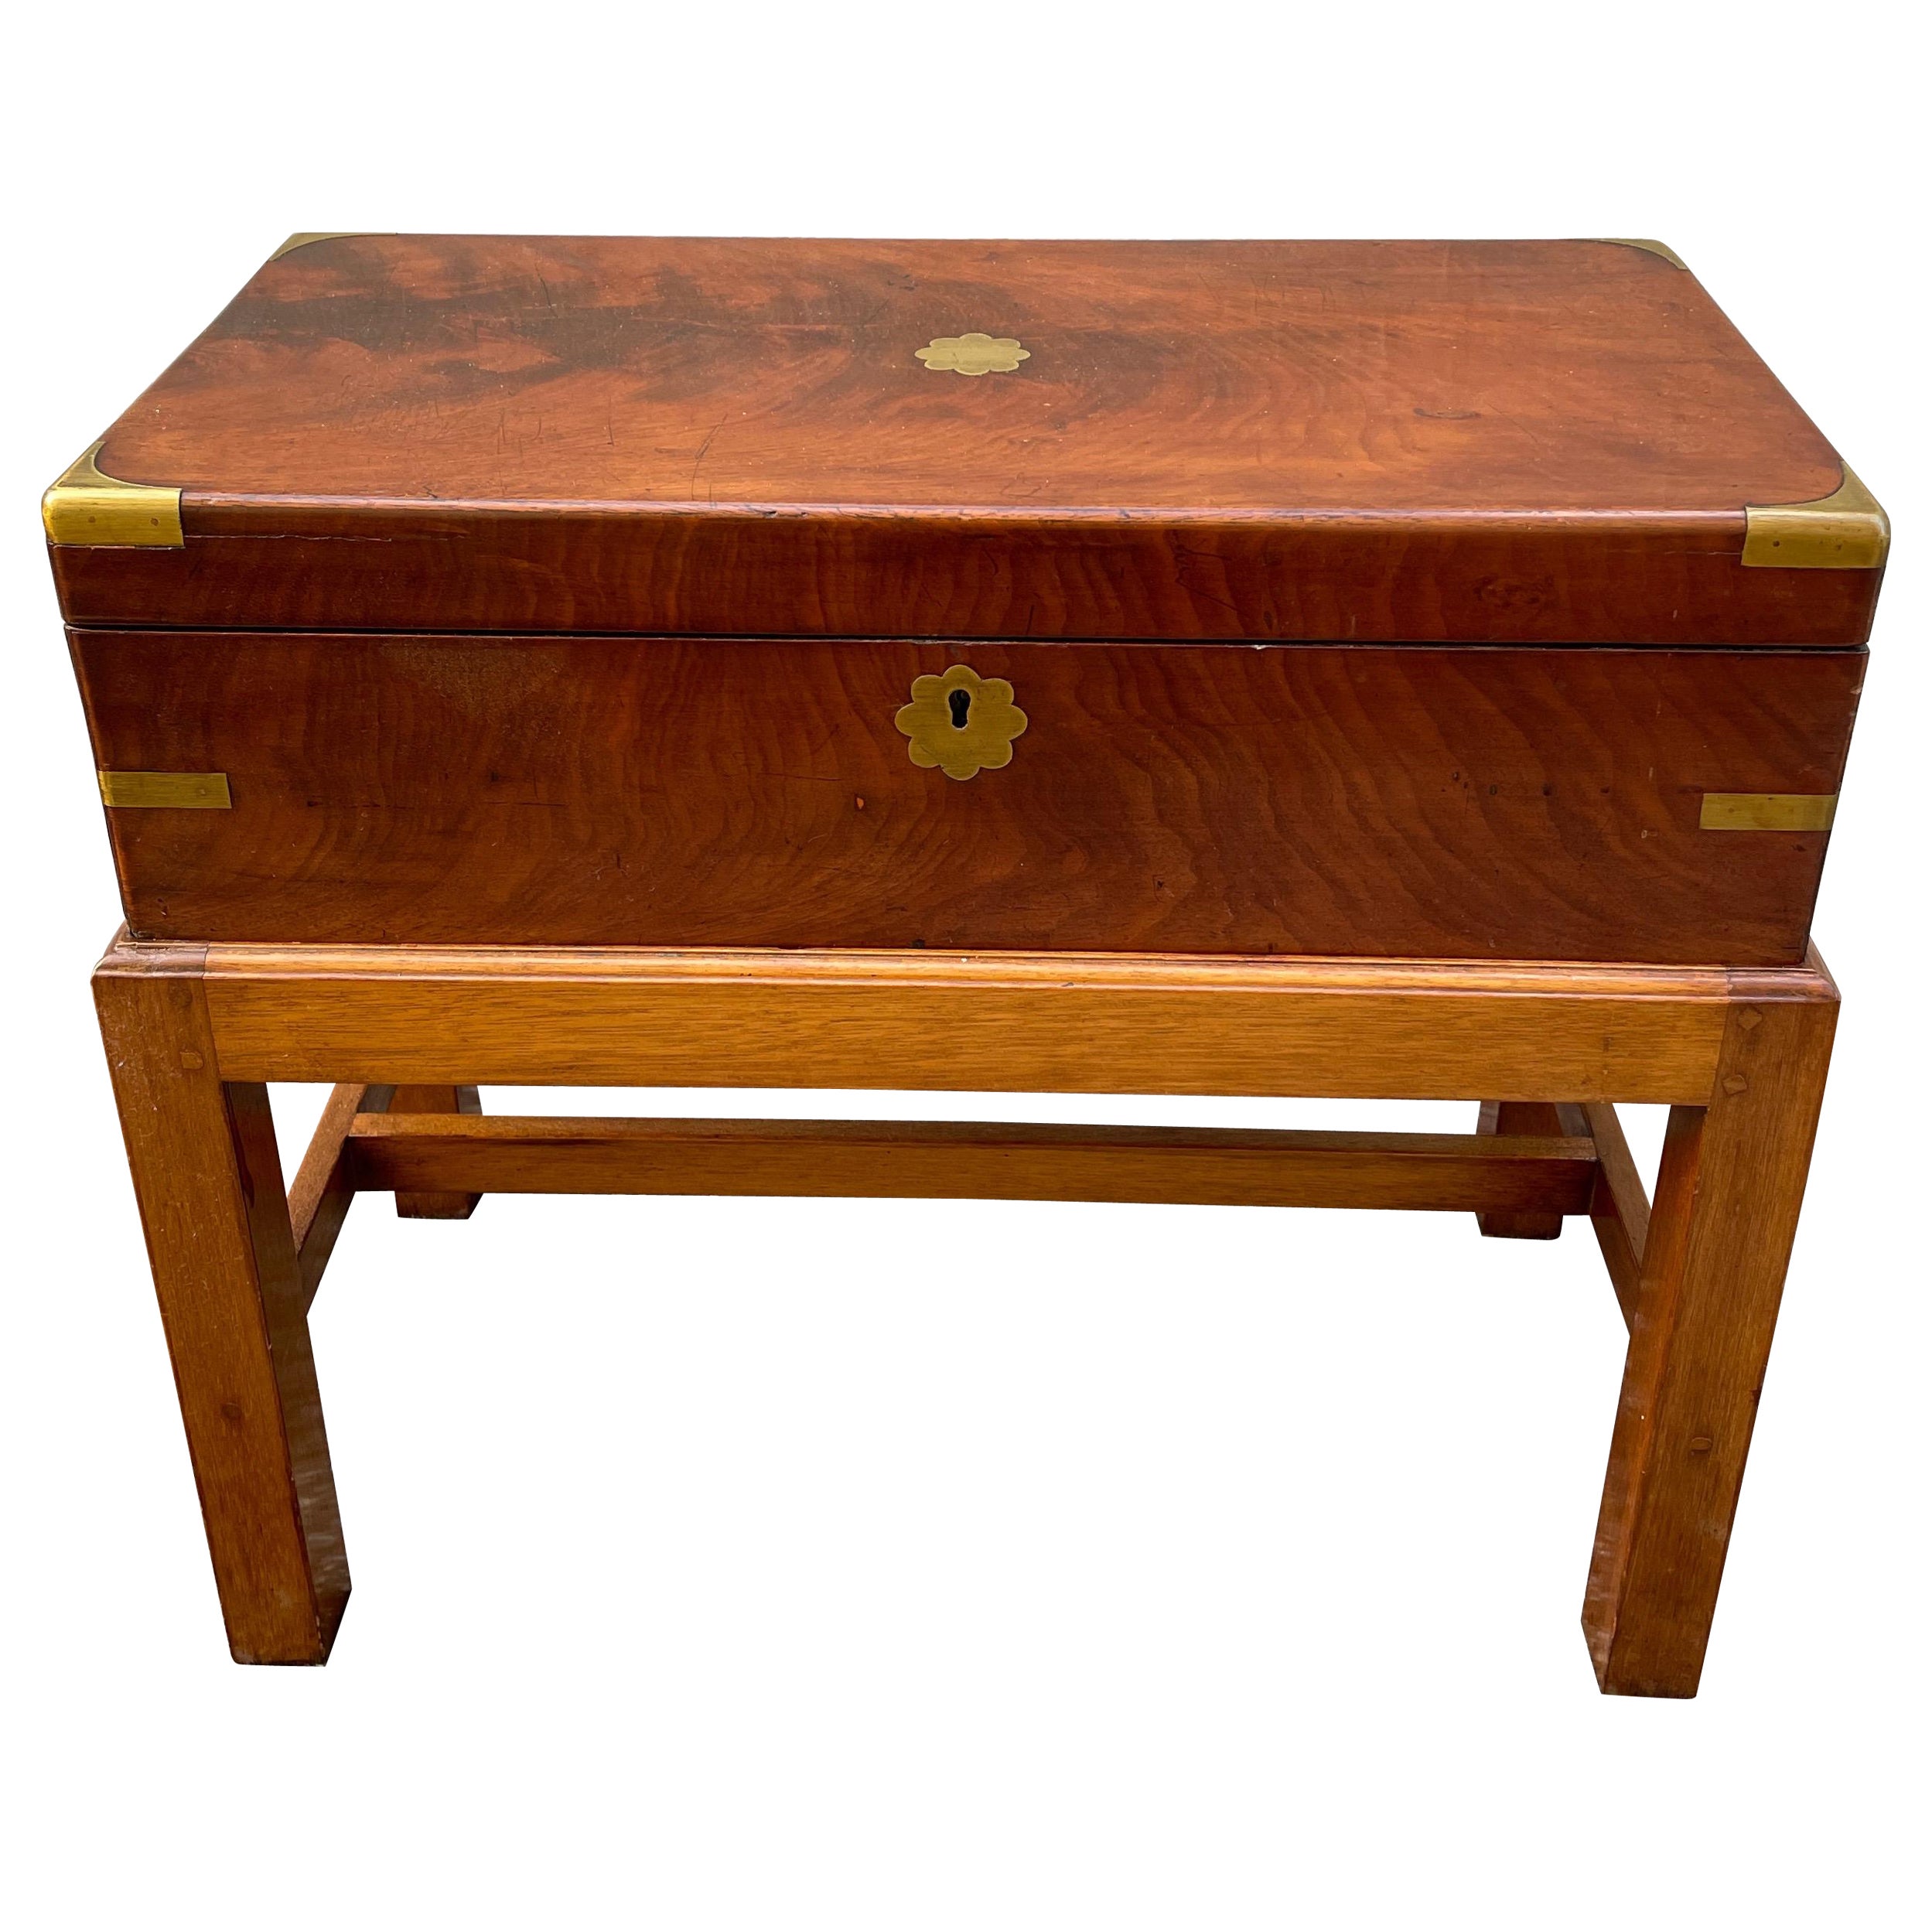 Antique Campaign Style Lap Desk on Stand